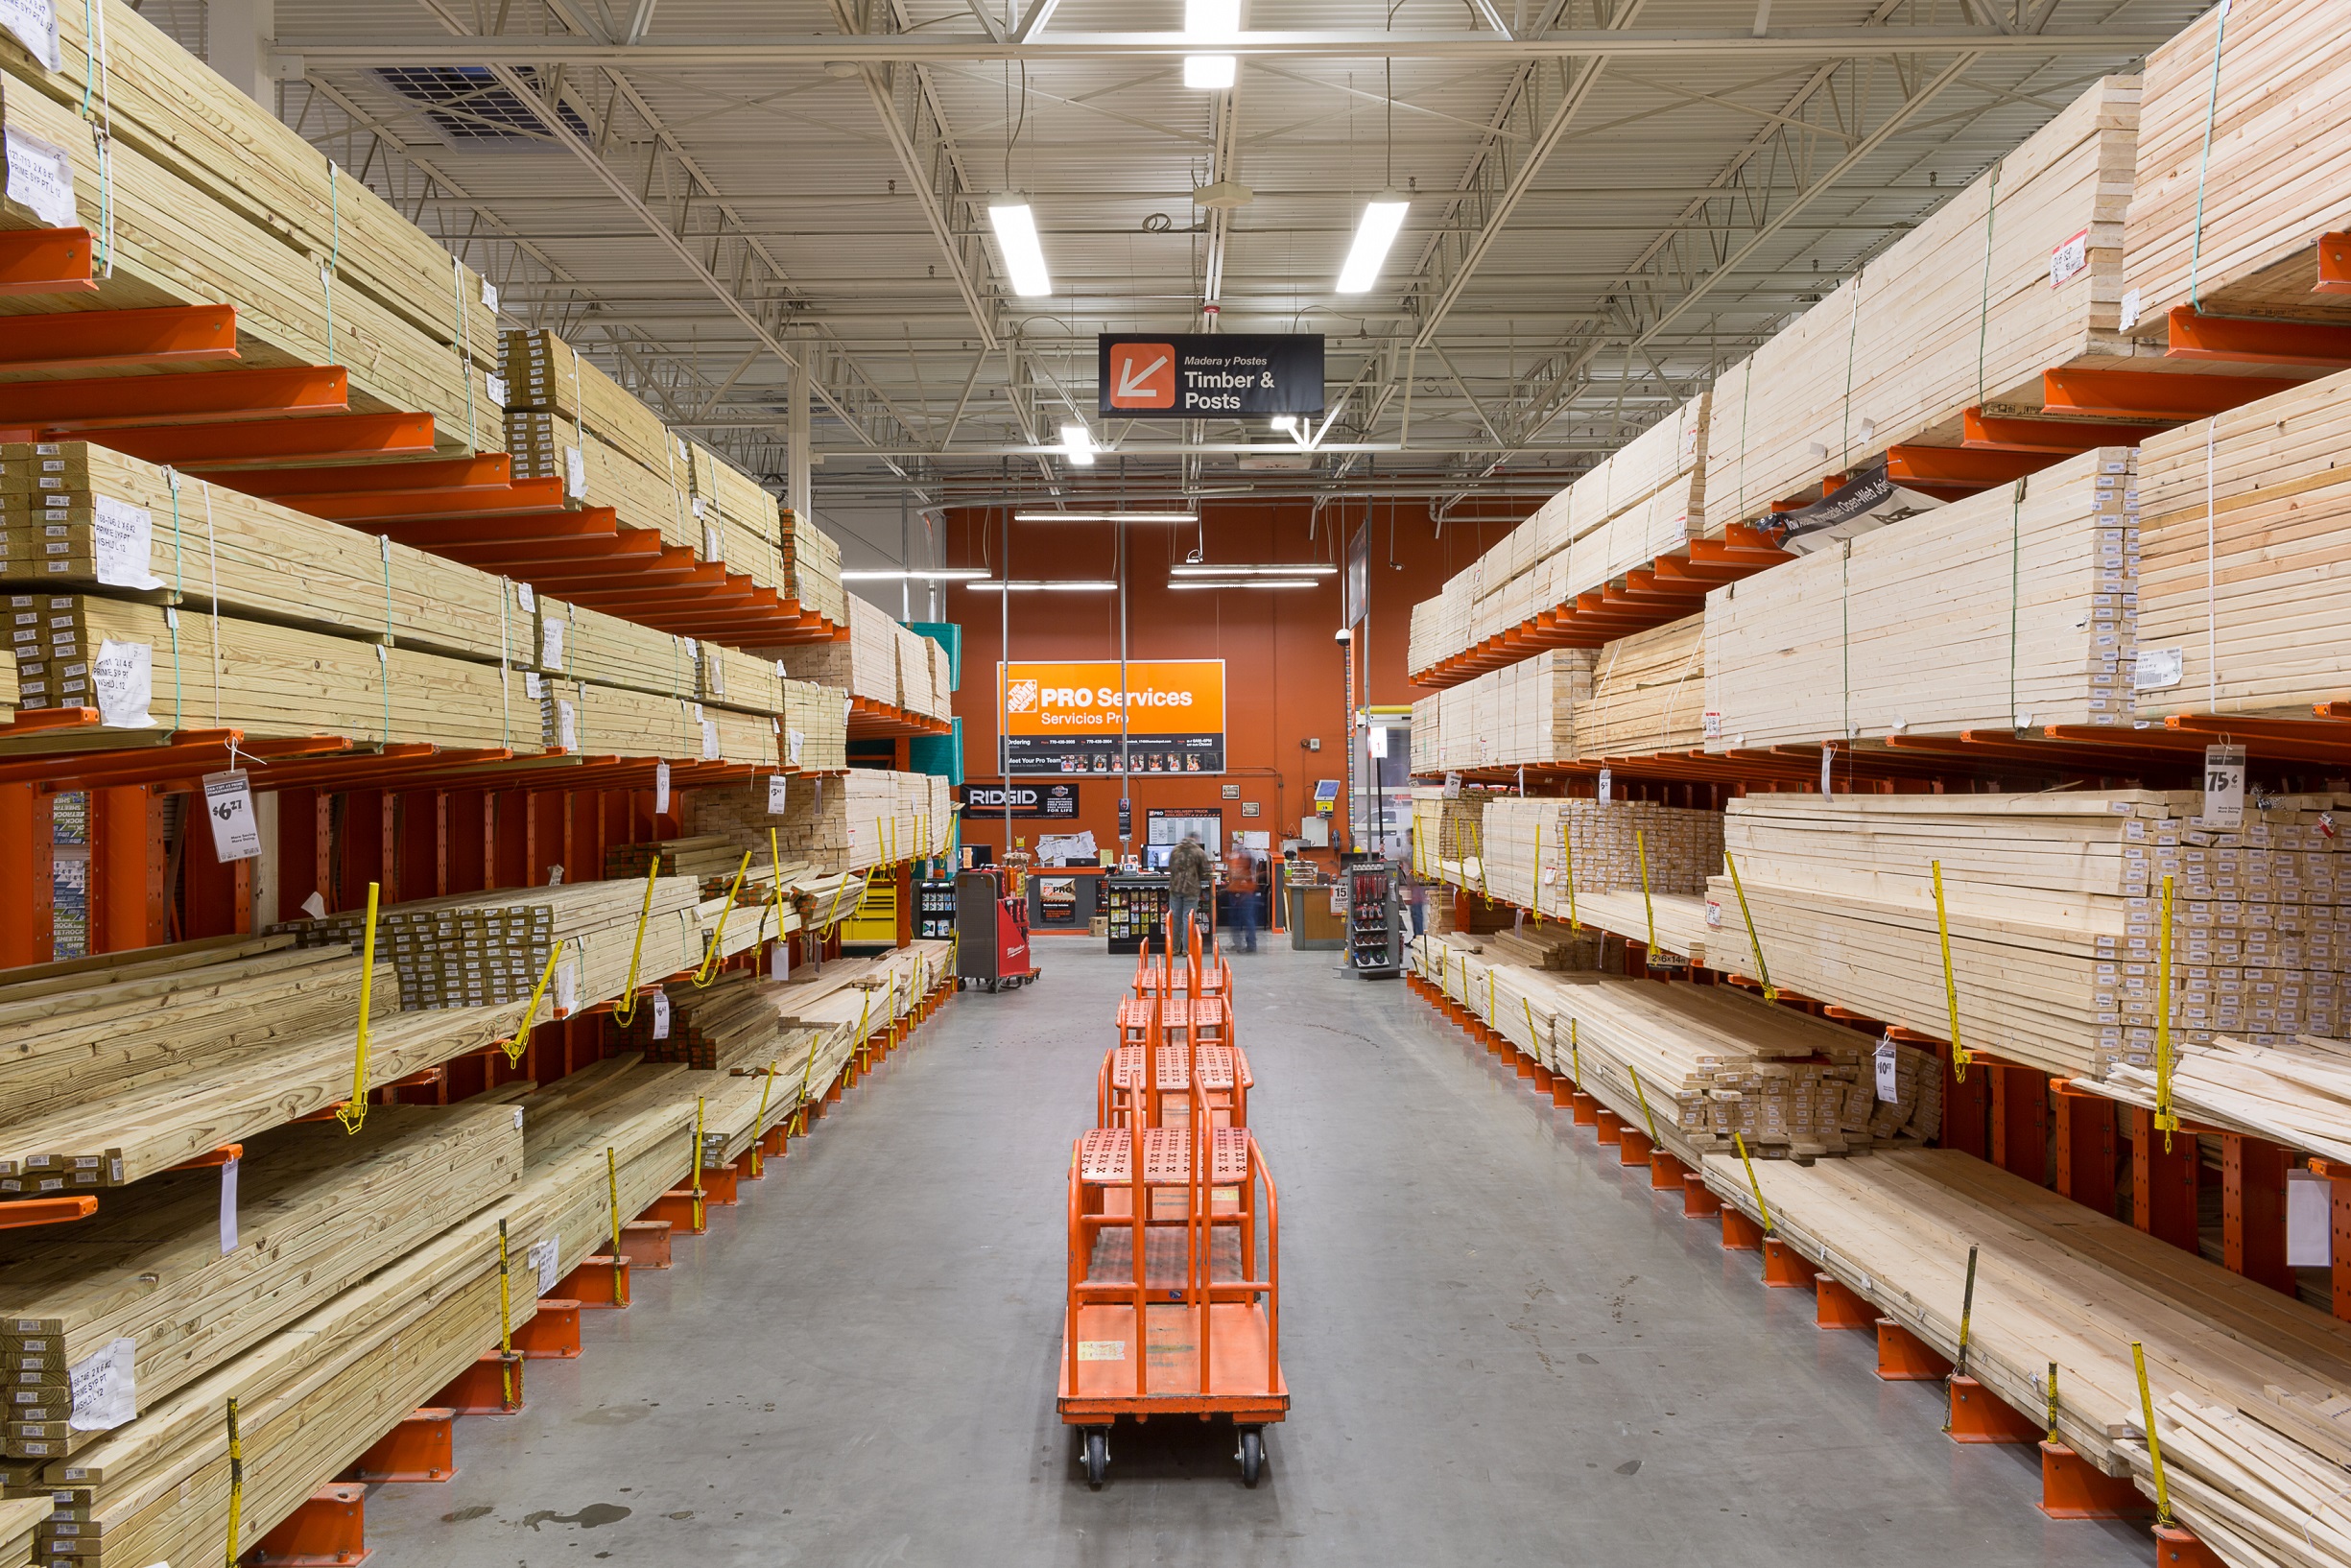 Home Depot to Open Four Distribution Centers